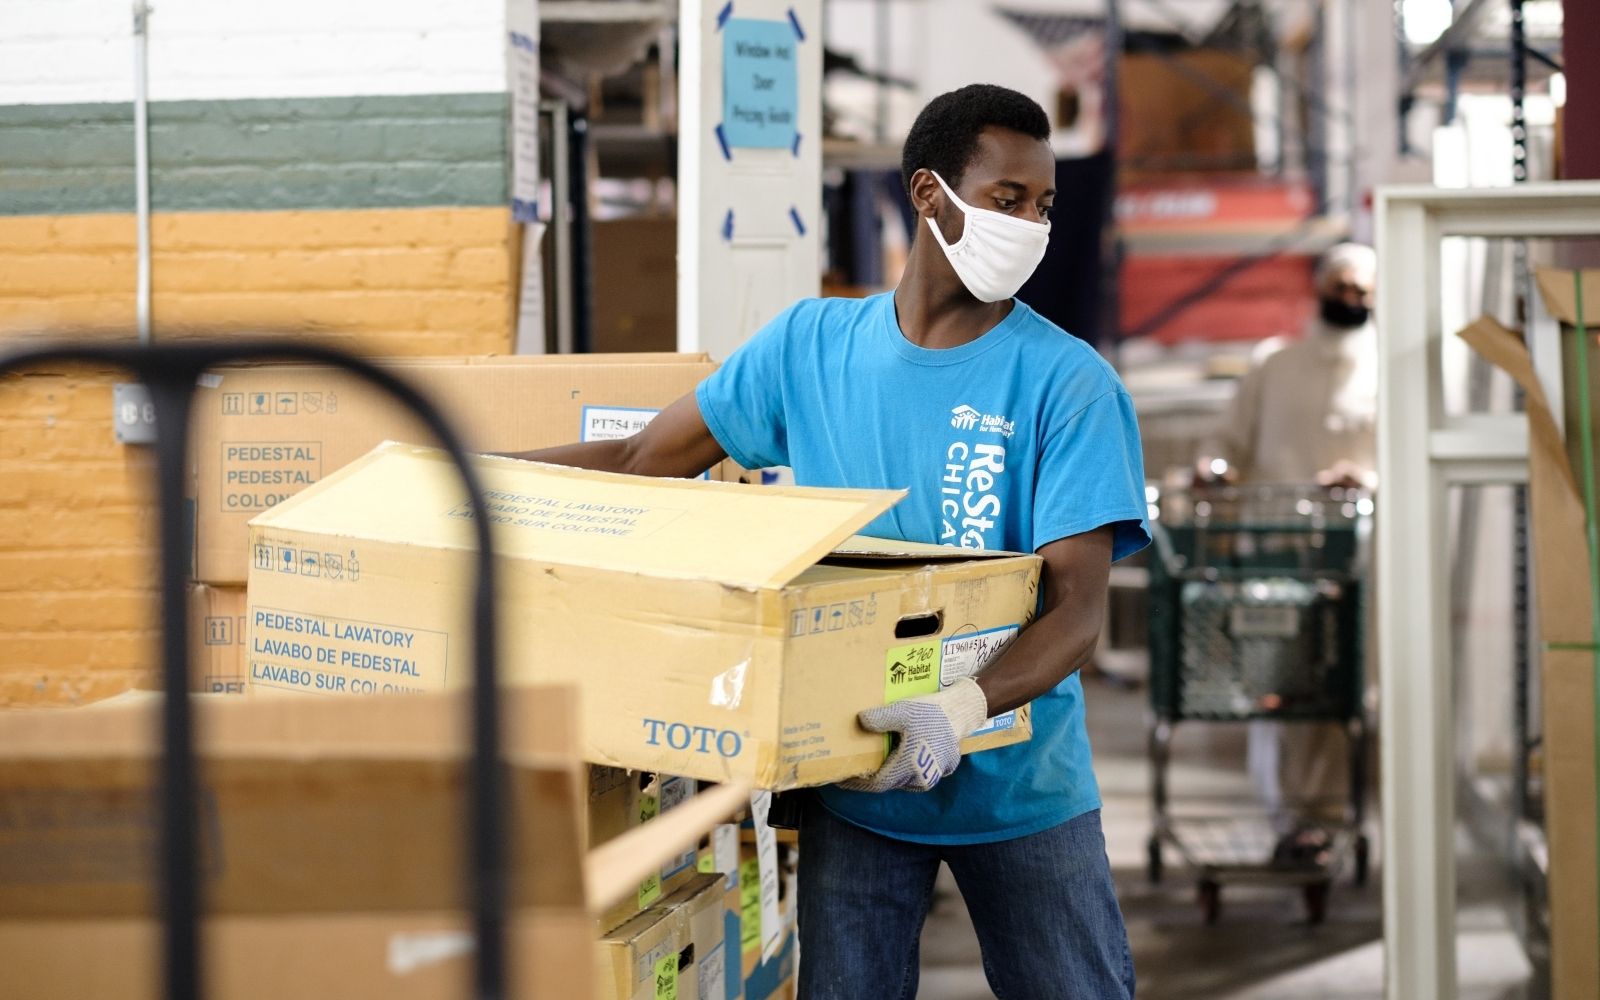 Man wearing blue shirt moving boxes and wearing a face mask